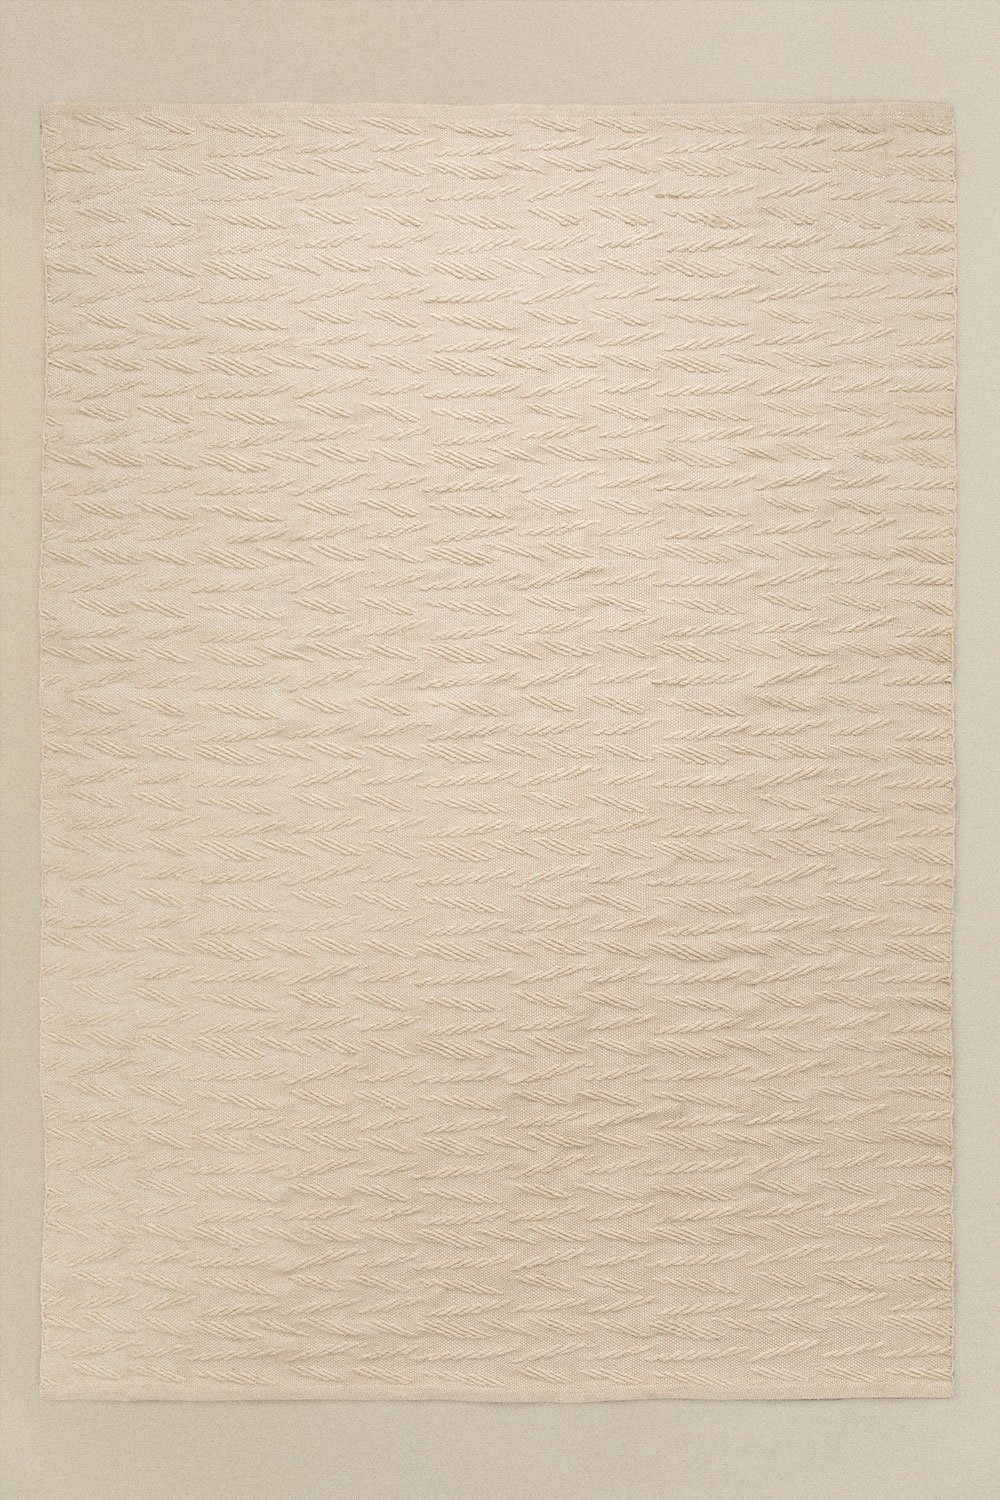 Ivaila Rug, gallery image 1